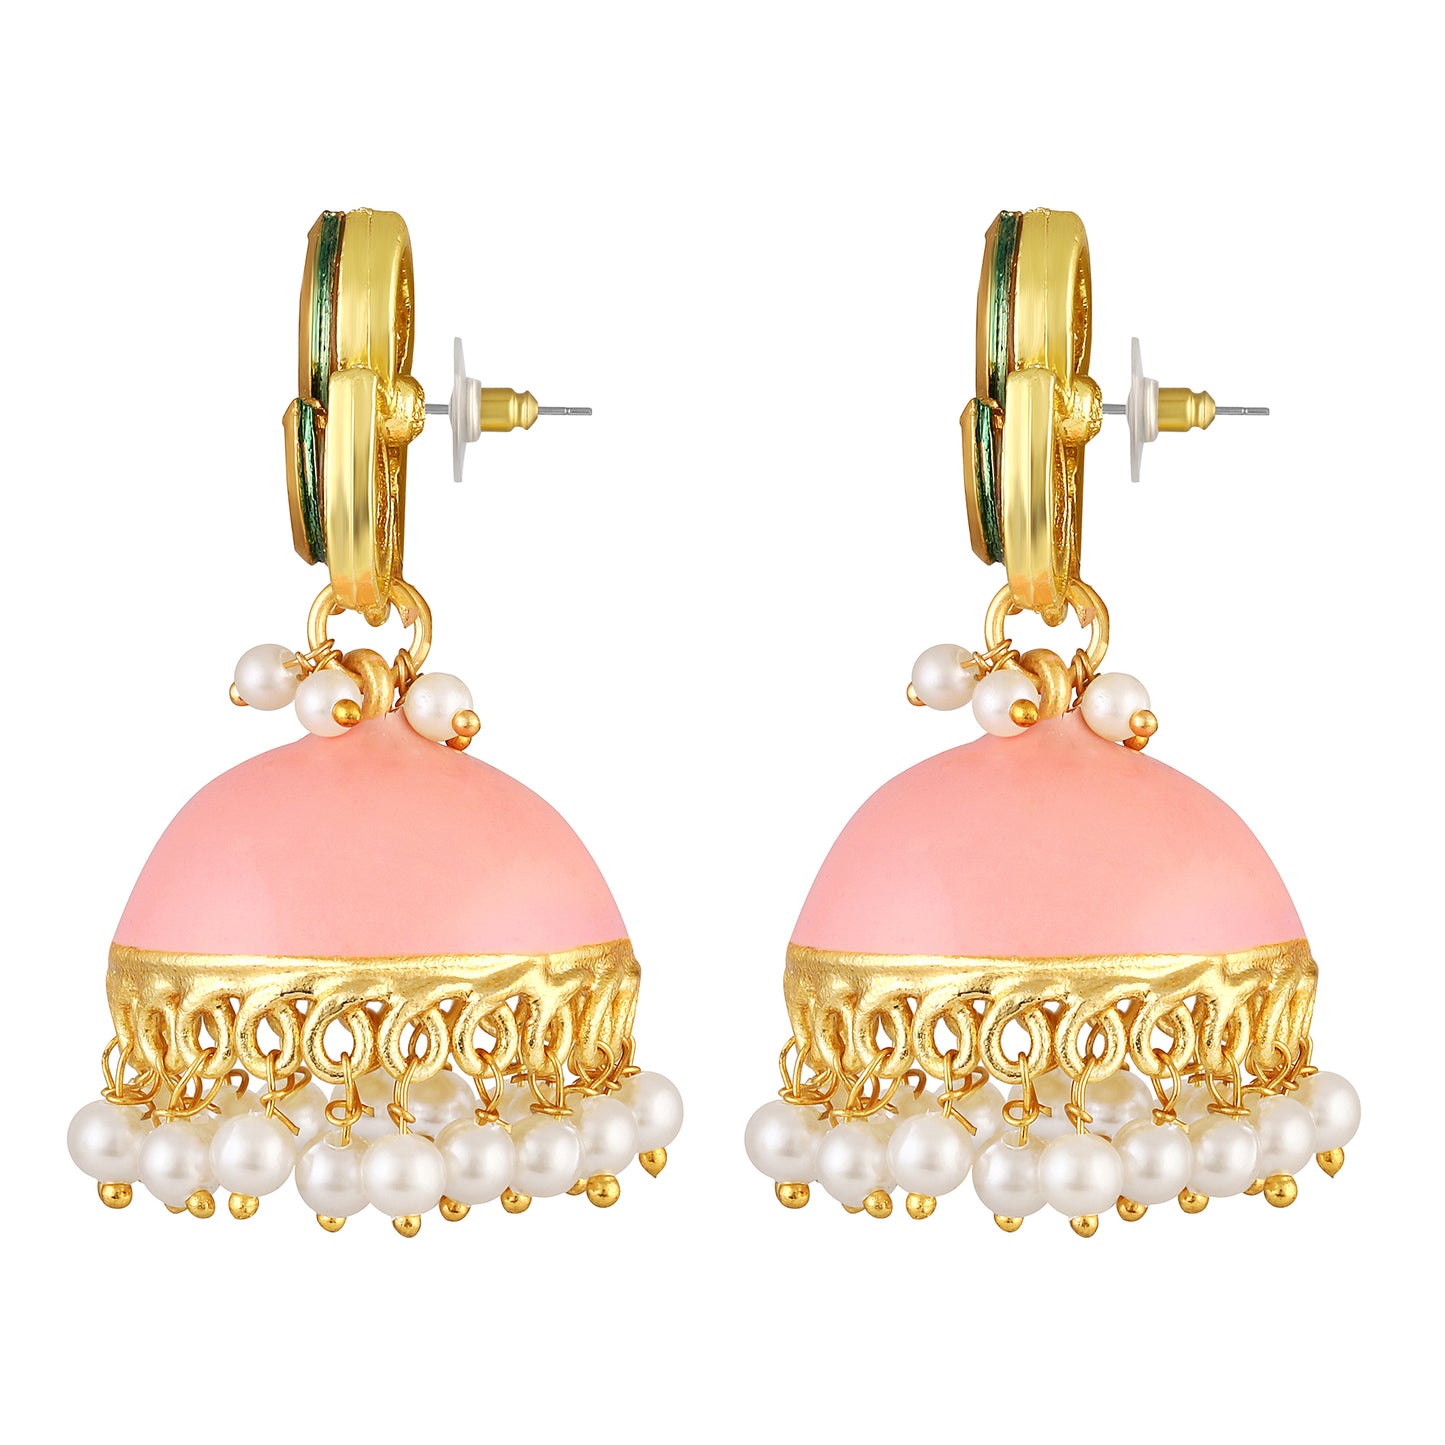 Bdiva 18K Gold Plated Kundan Pink Enamelled Earrings with Semi Cultured Pearls.